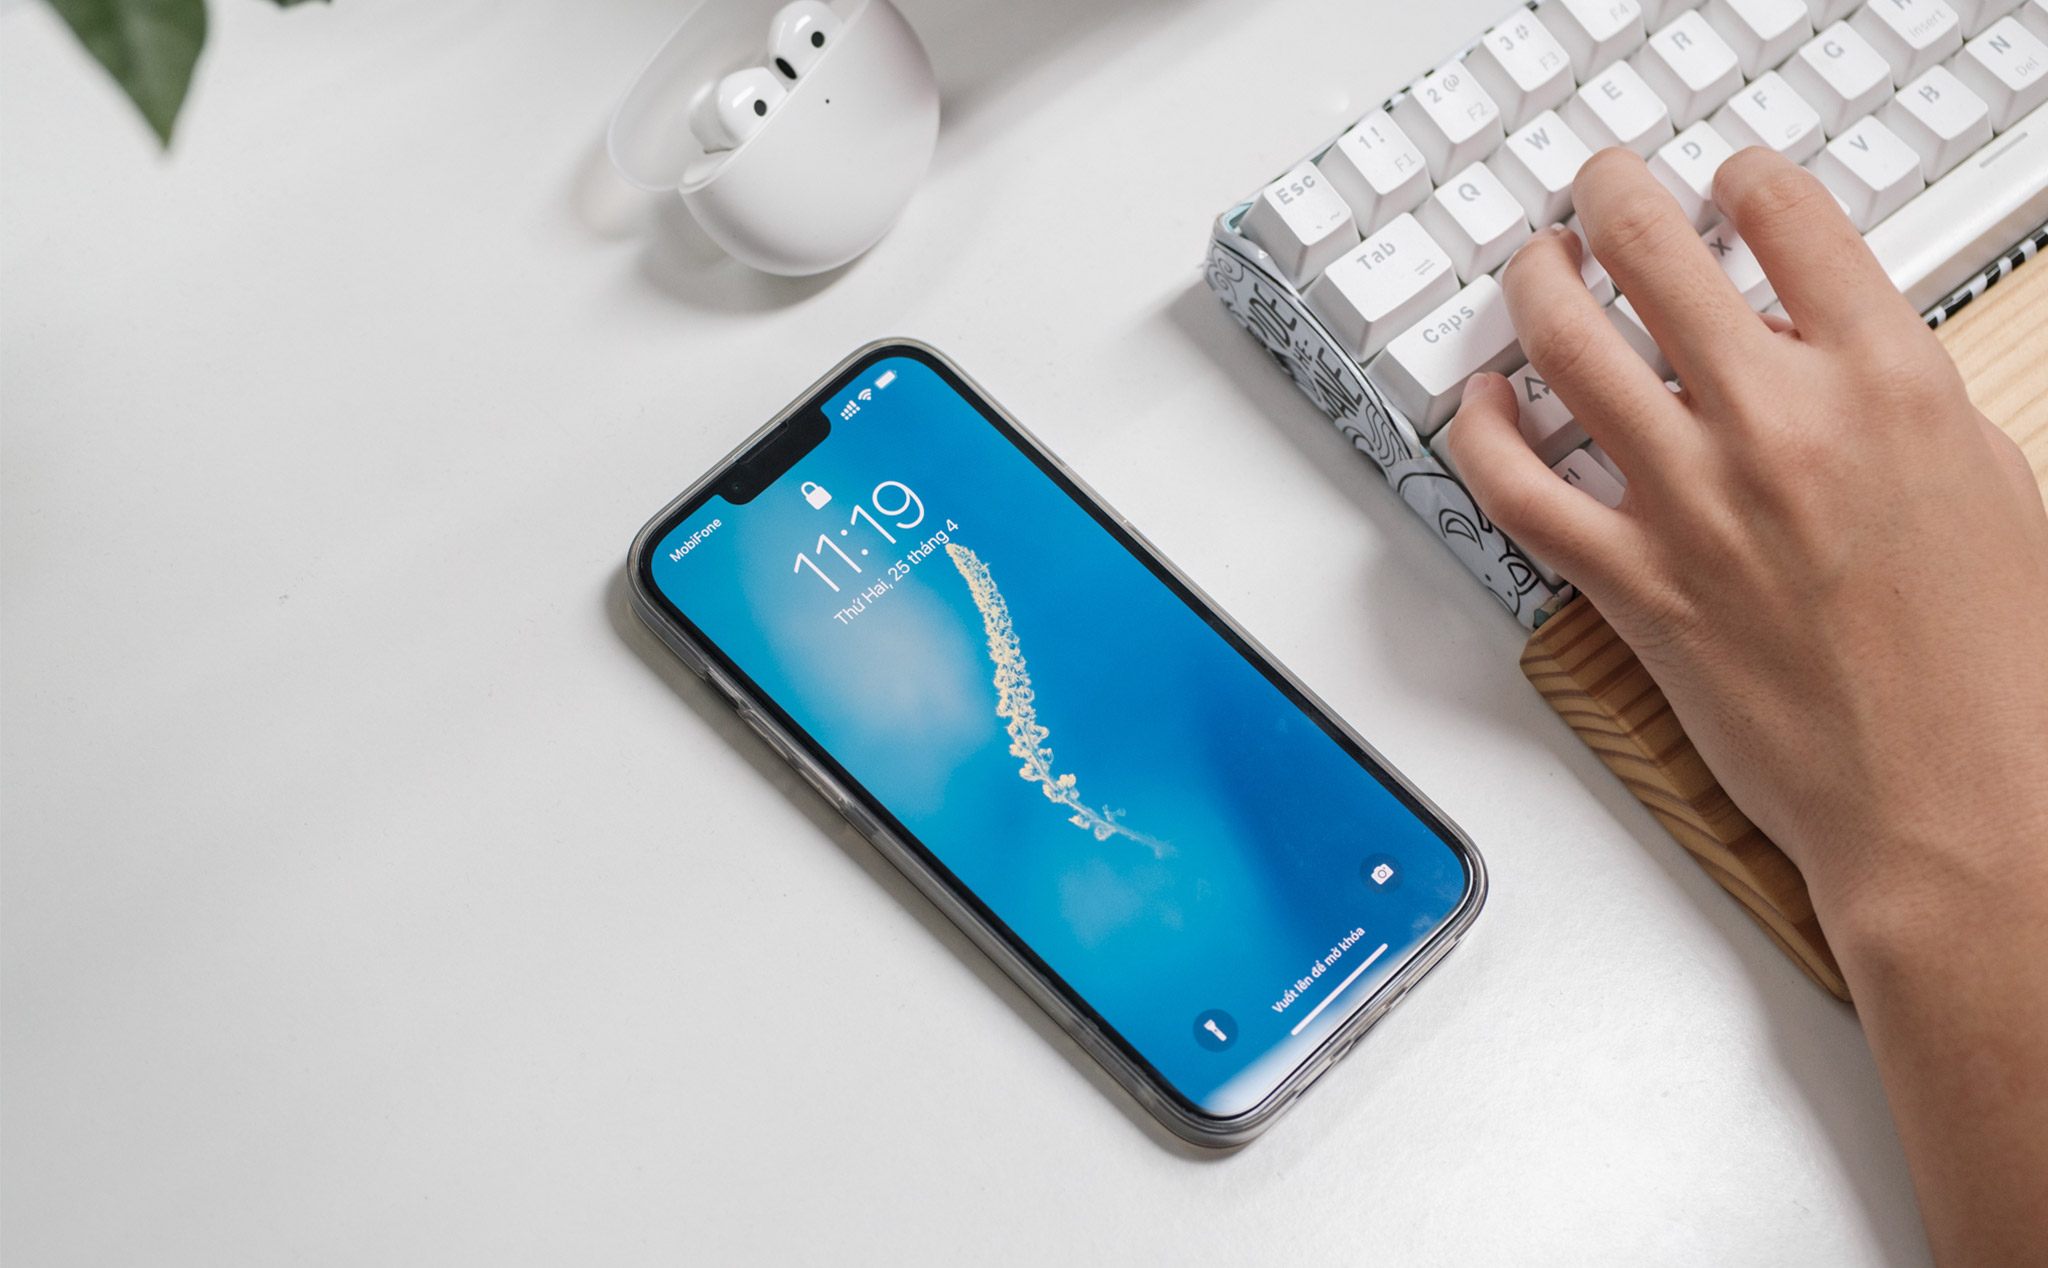 Bored of the same old iPhone wallpaper? Inject some creativity into your device by changing the background image! Discover amazing new wallpaper designs and themes to personalize your iPhone and give it a fresh new look.